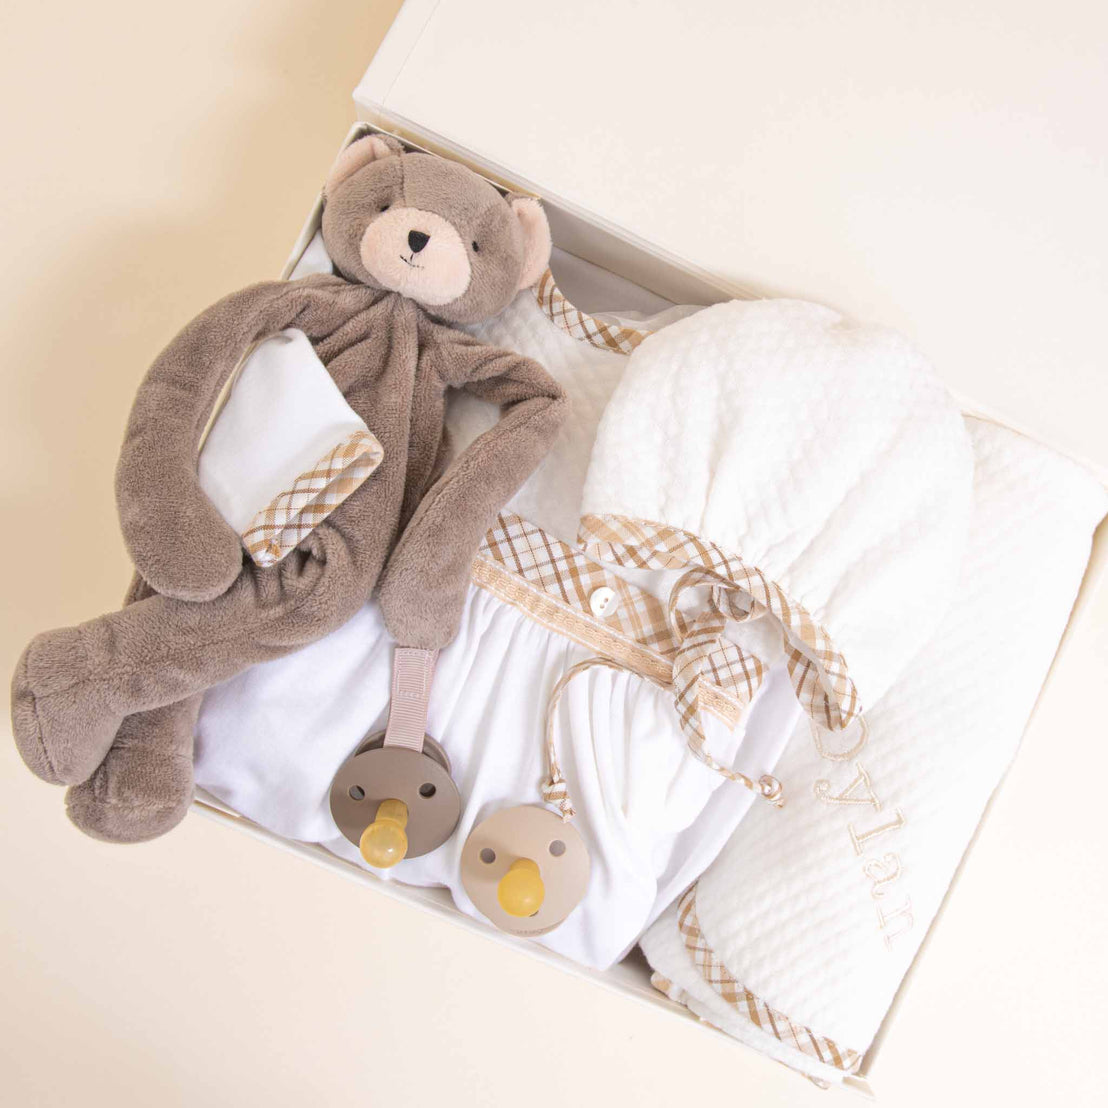 A baby gift box containing a Dylan Newborn Gift Set, all neatly arranged and displayed on a cream background.